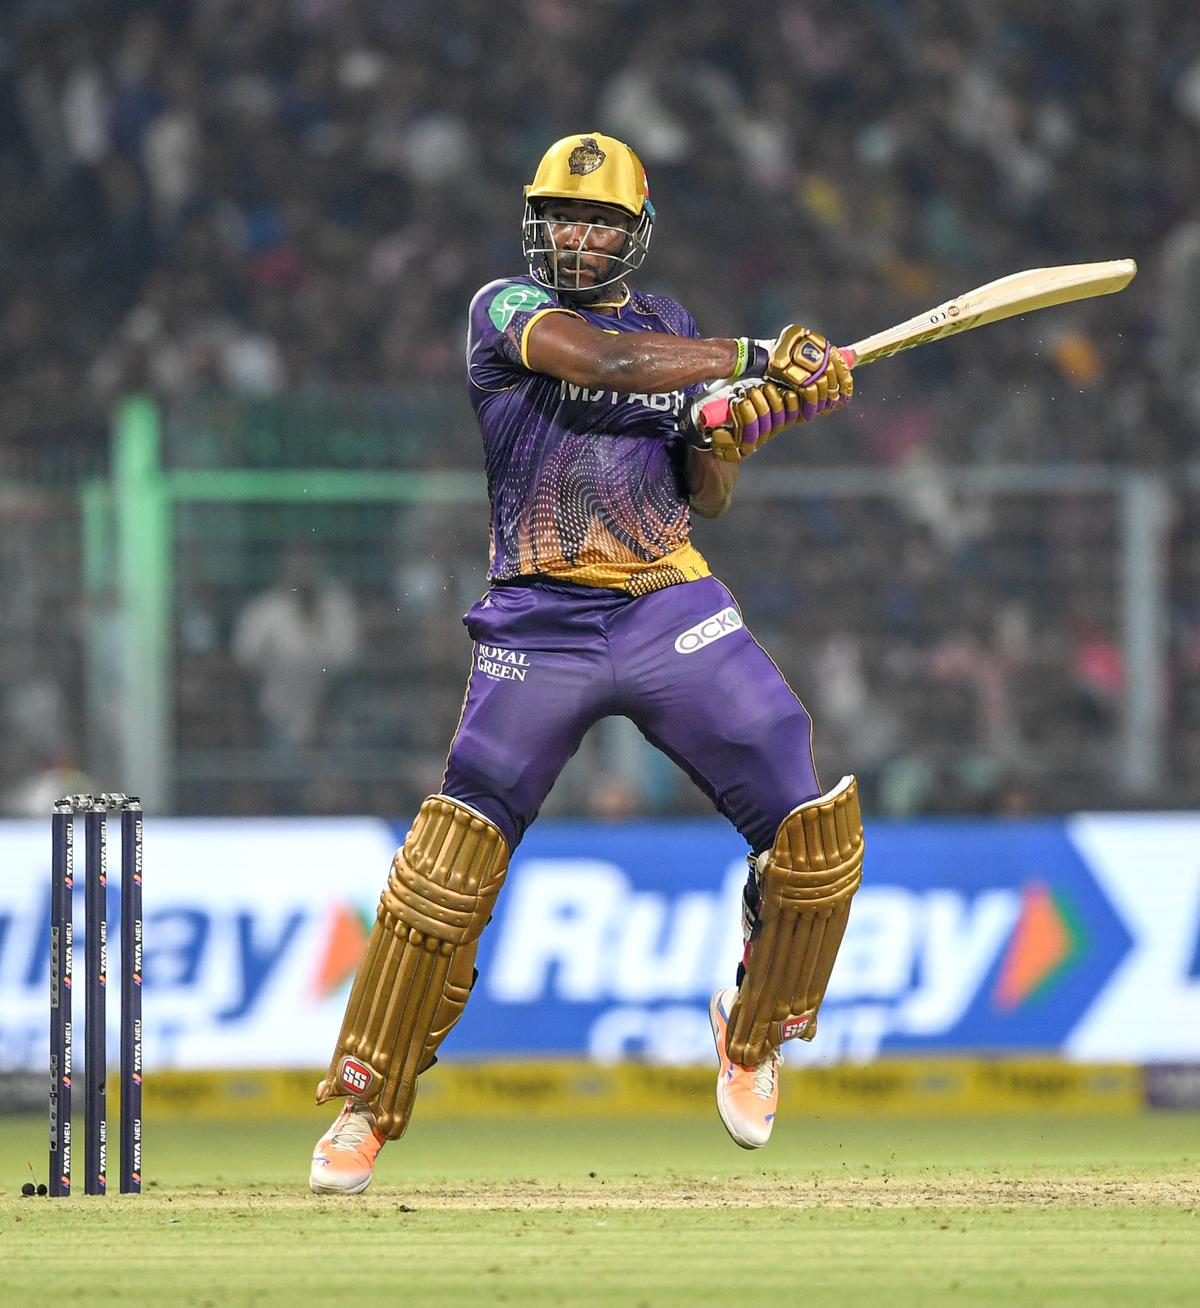 Standing tall: Andre Russell smashed a blistering 42 off 23 balls to set the stage for KKR's five-wicket win.